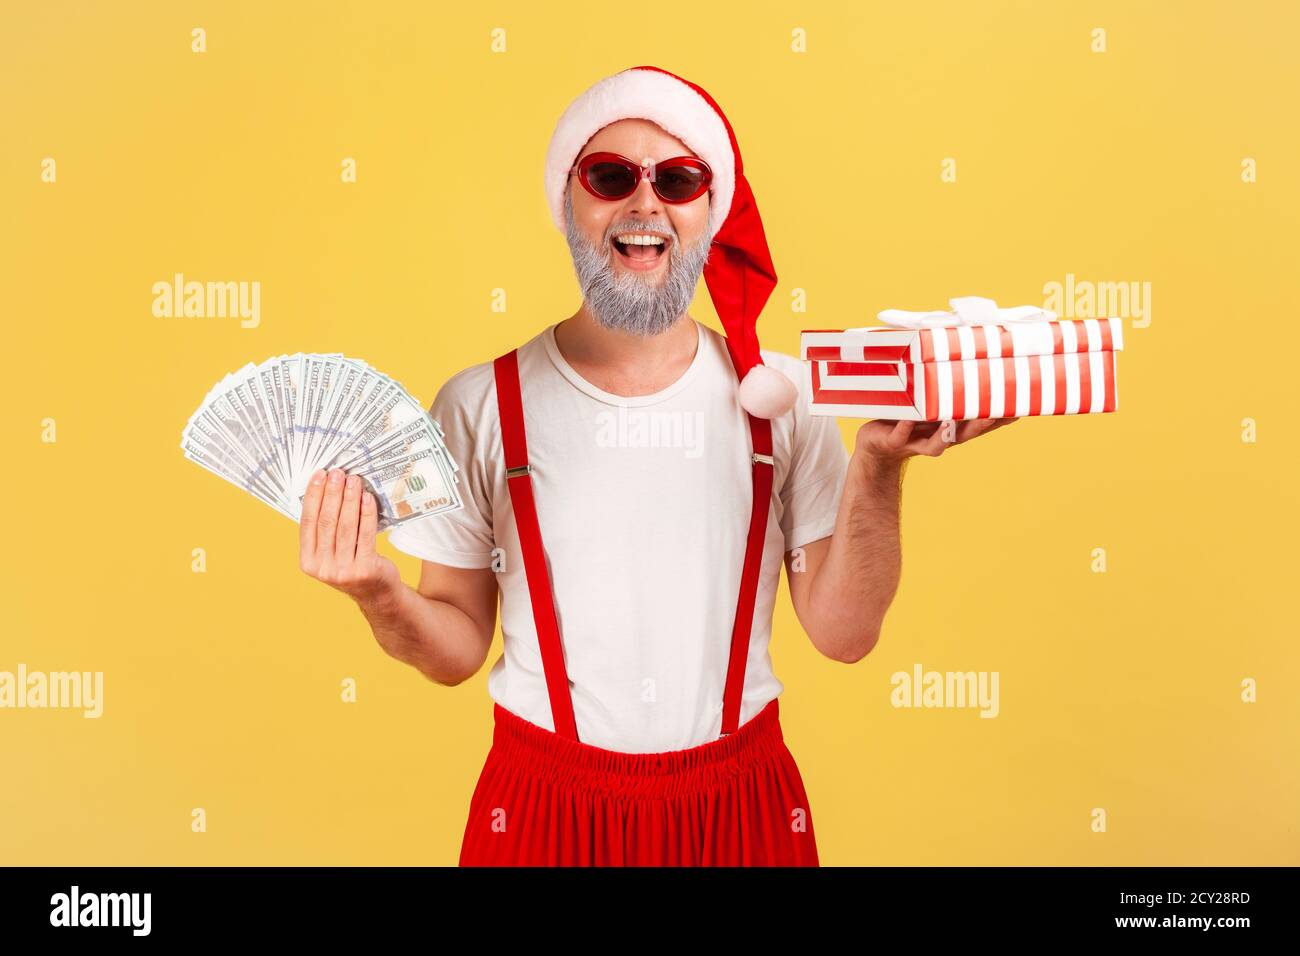 Cheerful positive elderly man in sunglasses and santa claus hat holding fan of dollars and gift box smiling at camera, preparing presents on holidays. Stock Photo